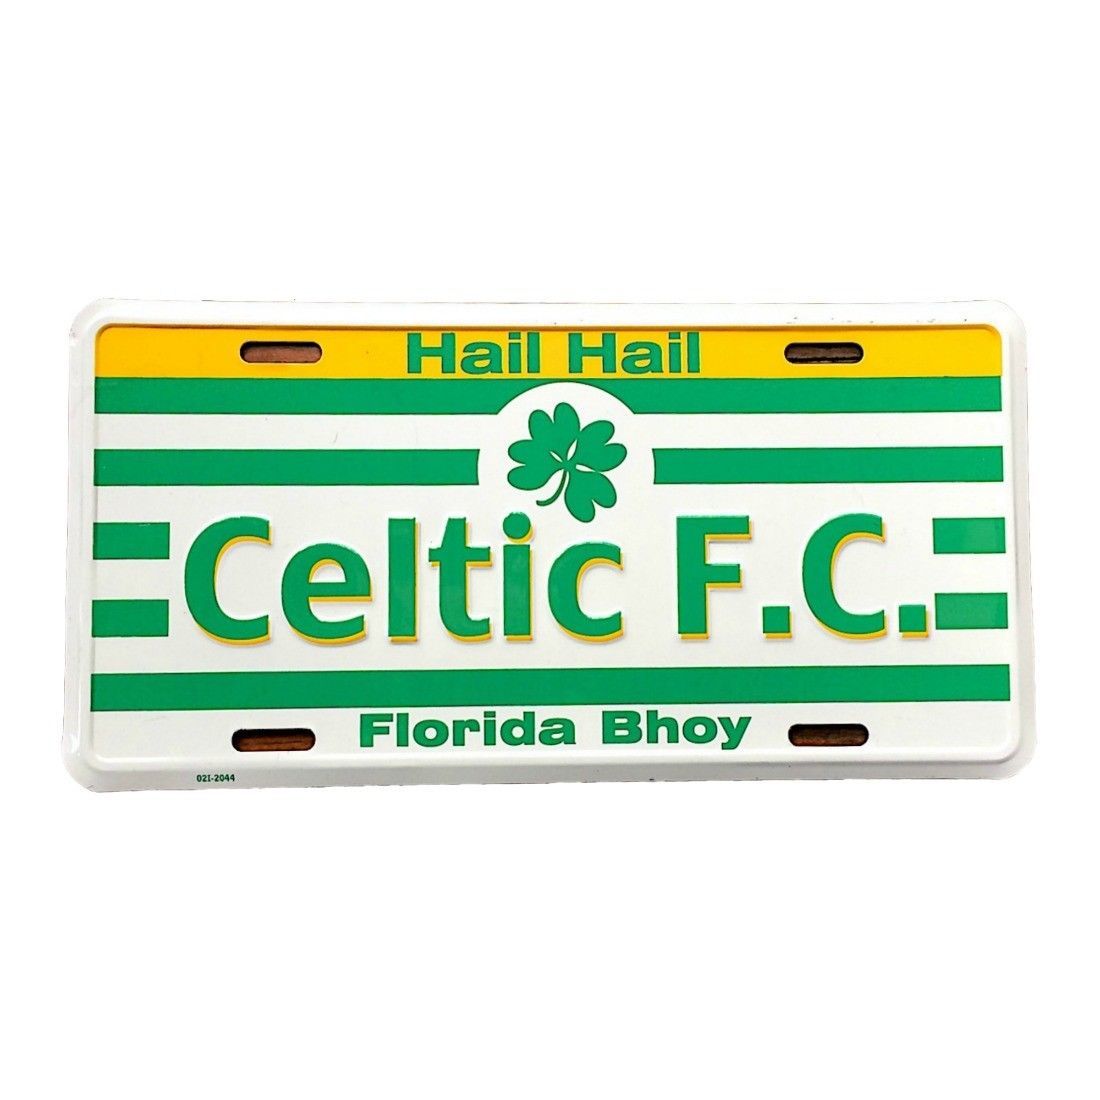 Primary image for CELTIC FC License Plate Florida Bhoy Football Soccer Team 6x12 Standard US